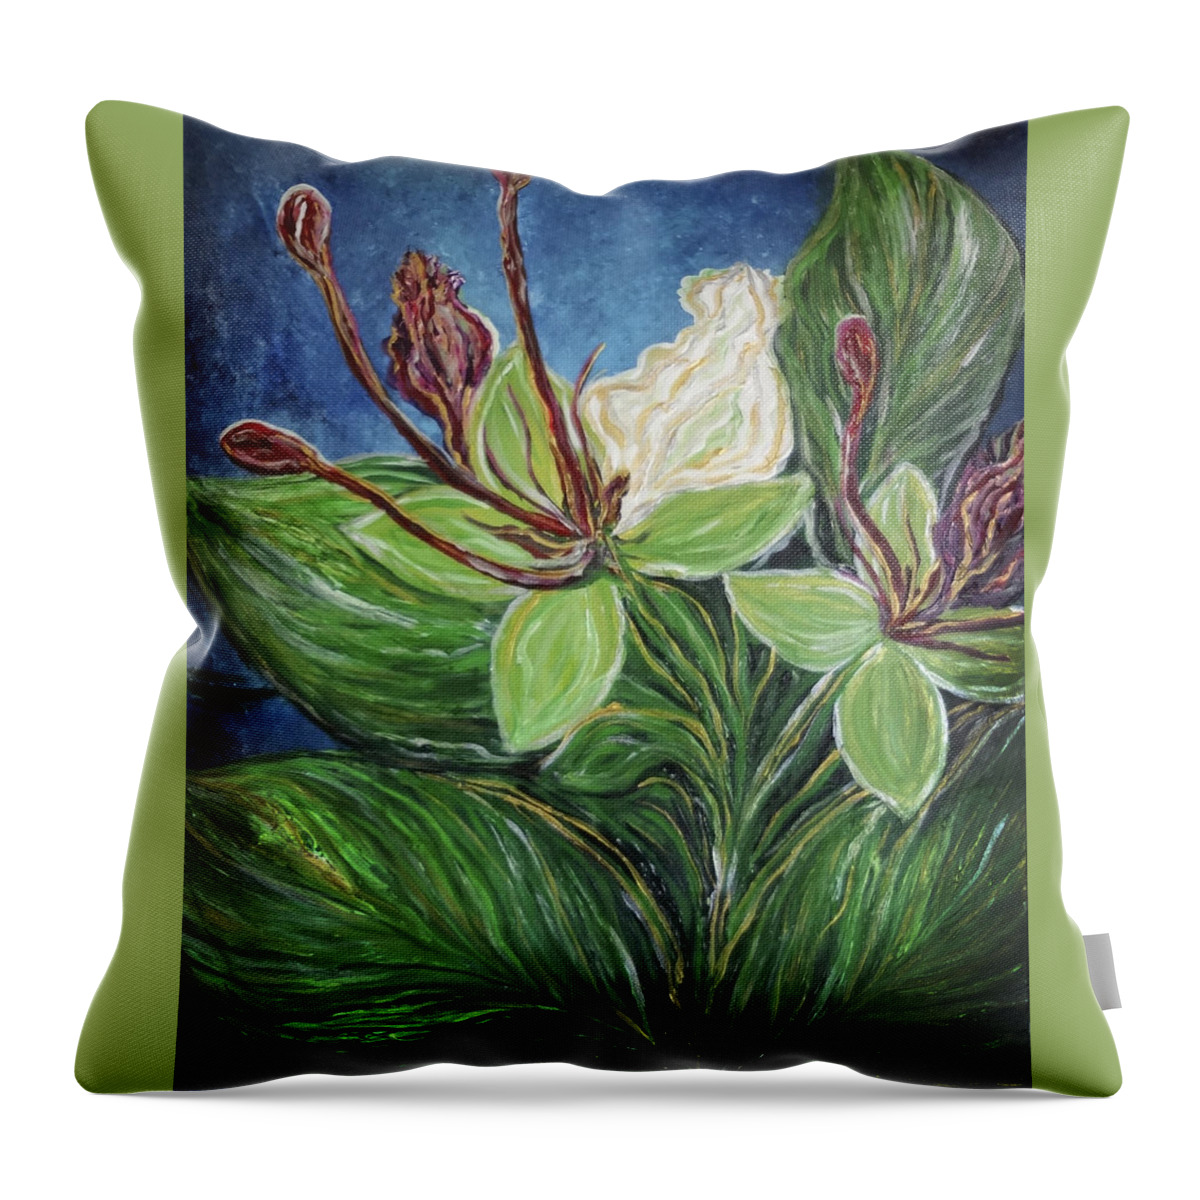 Ifit Throw Pillow featuring the painting Ifit Flower Guam by Michelle Pier